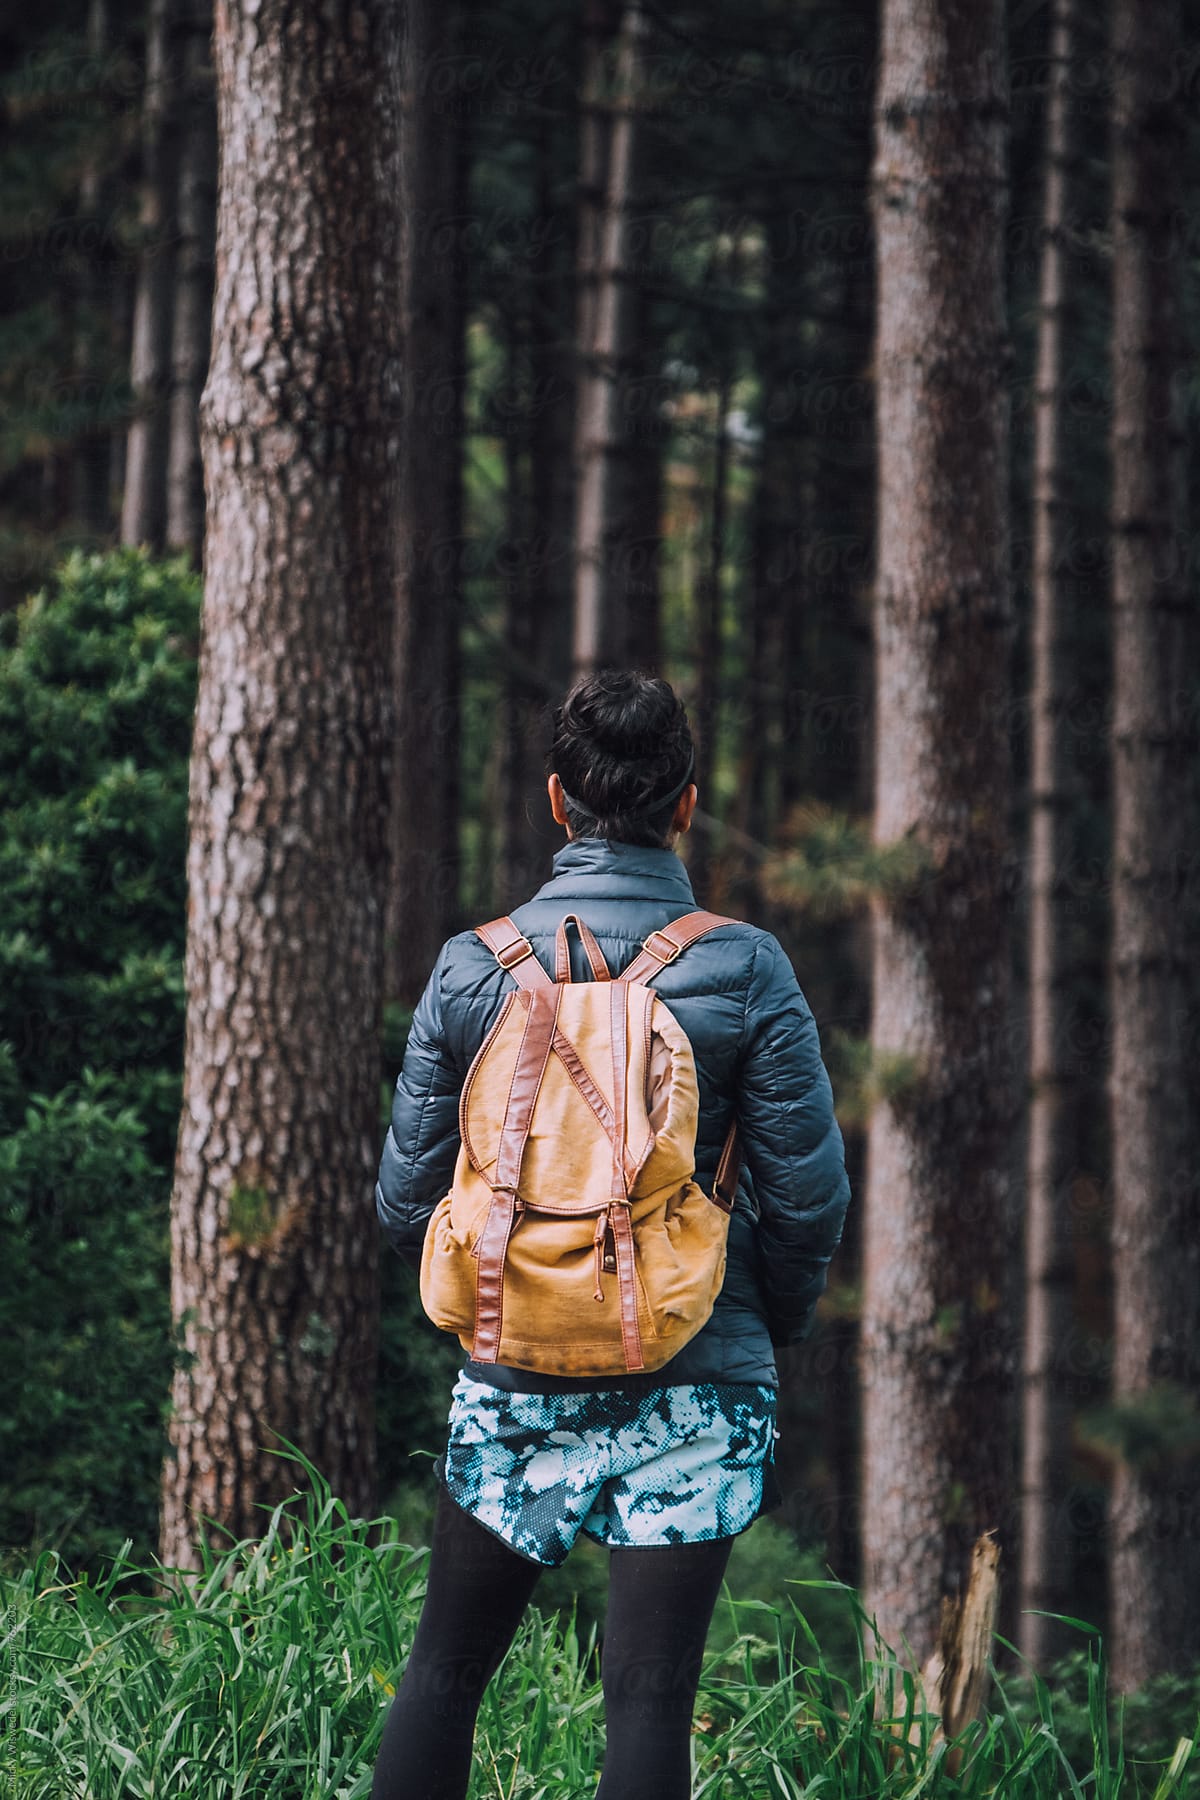 Woman with a backpack hiking in a forest